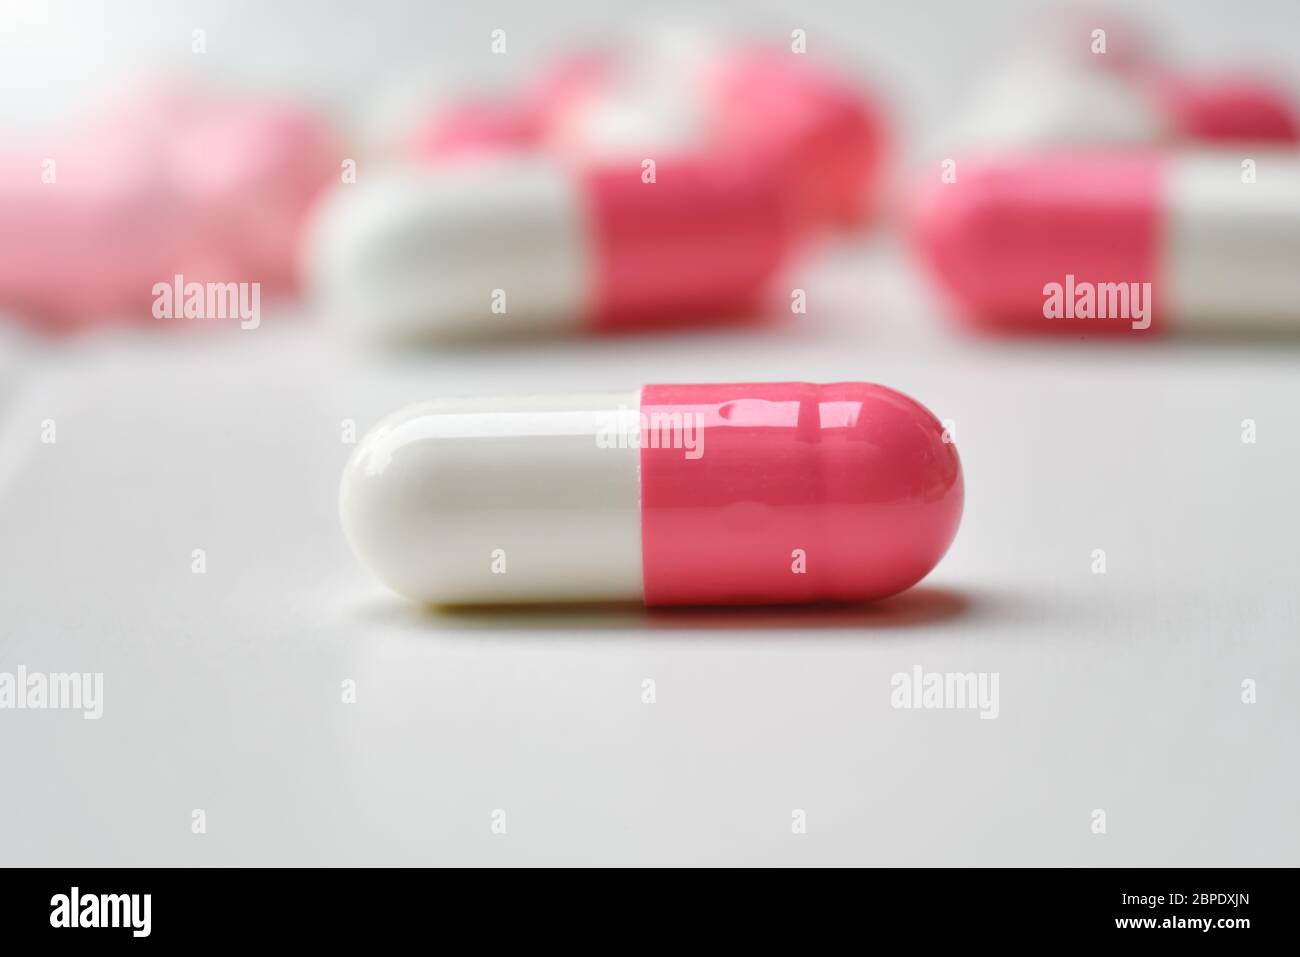 Pharmaceutical medicine pills, tablets and capsules pink-white on white background. Flat lay. Copy space. Medicine concepts. protect colona virus or c Stock Photo